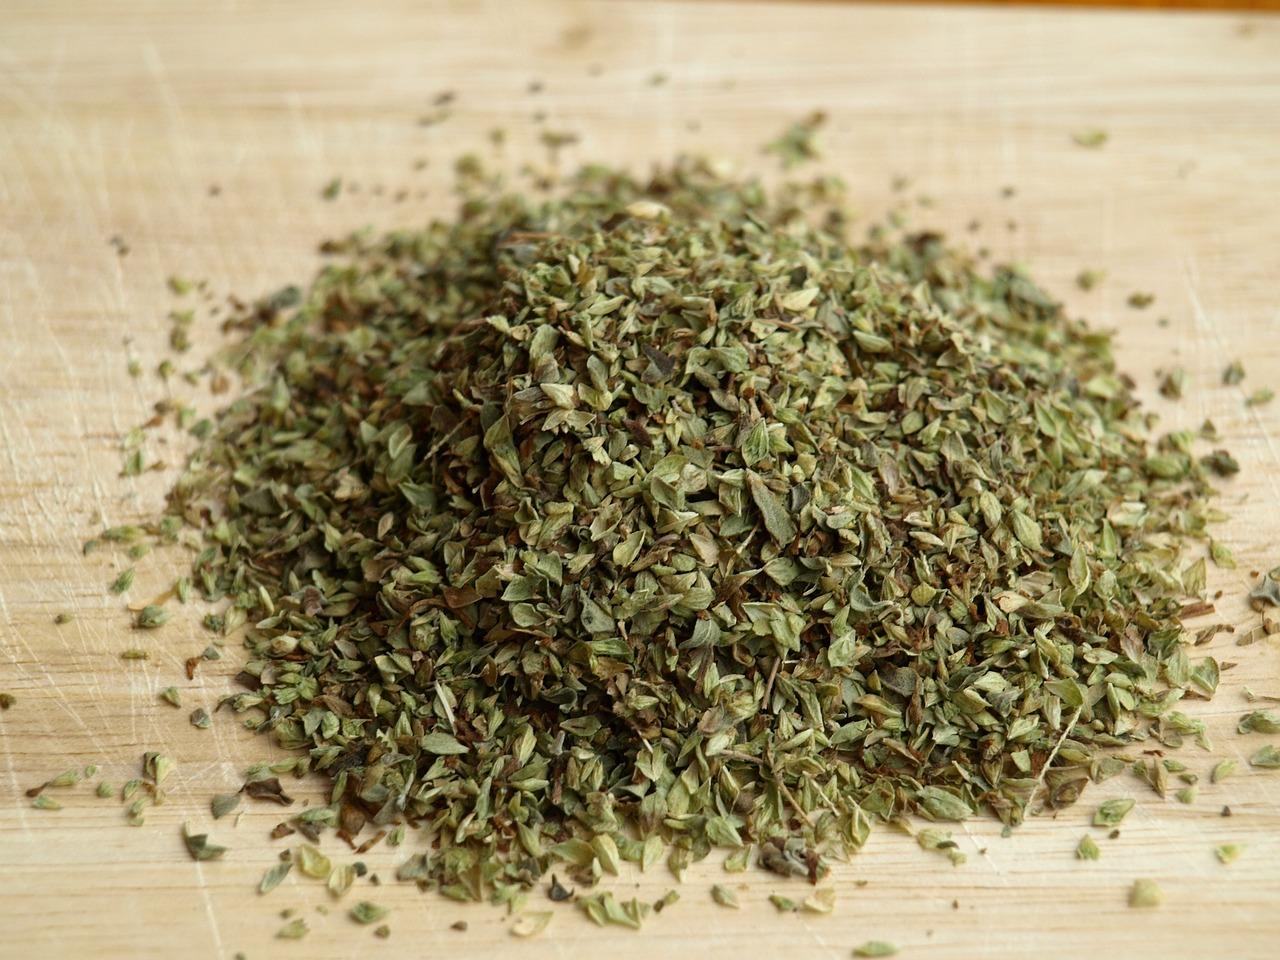 How To Harvest Oregano Without Killing the Plant